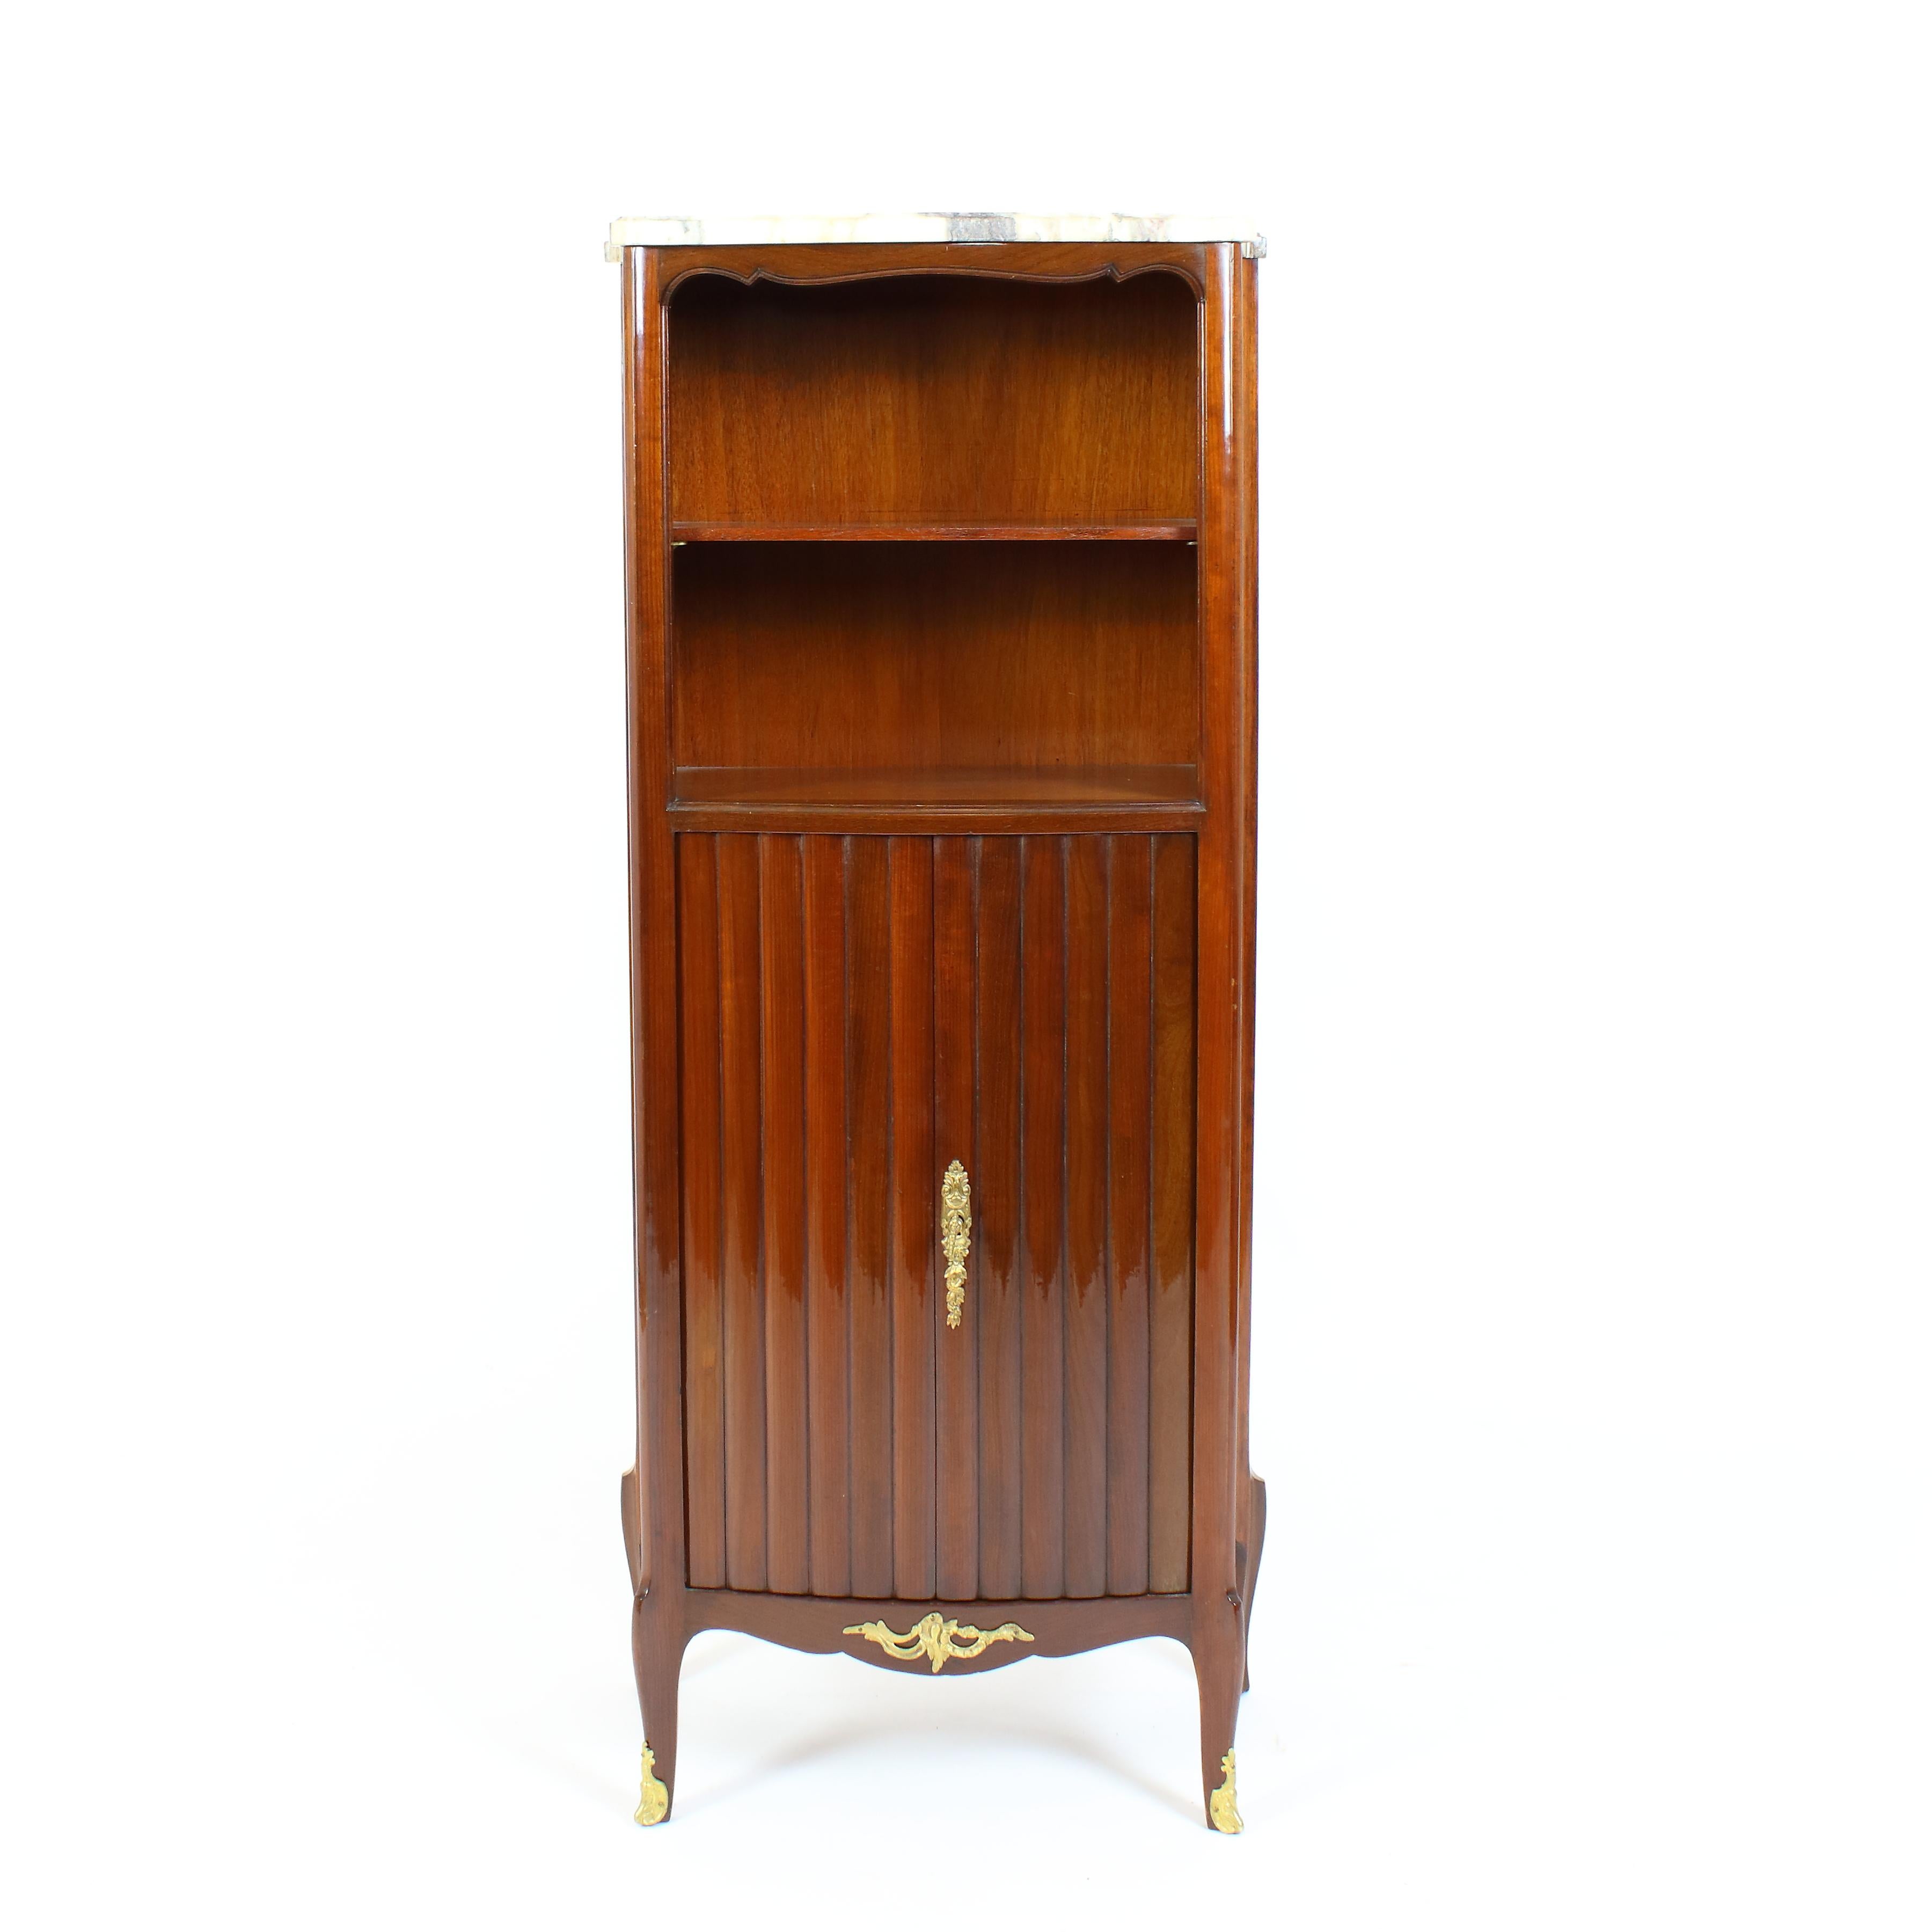 Late 19th Century French Louis XV Transition Tall Boy or Shelf

Rectangular slight bow front Tall Boy or shelf standing on four small cabriole feet. The lower part opening with two fluted doors, the upper part fitted with two shelves. The Tall Boy